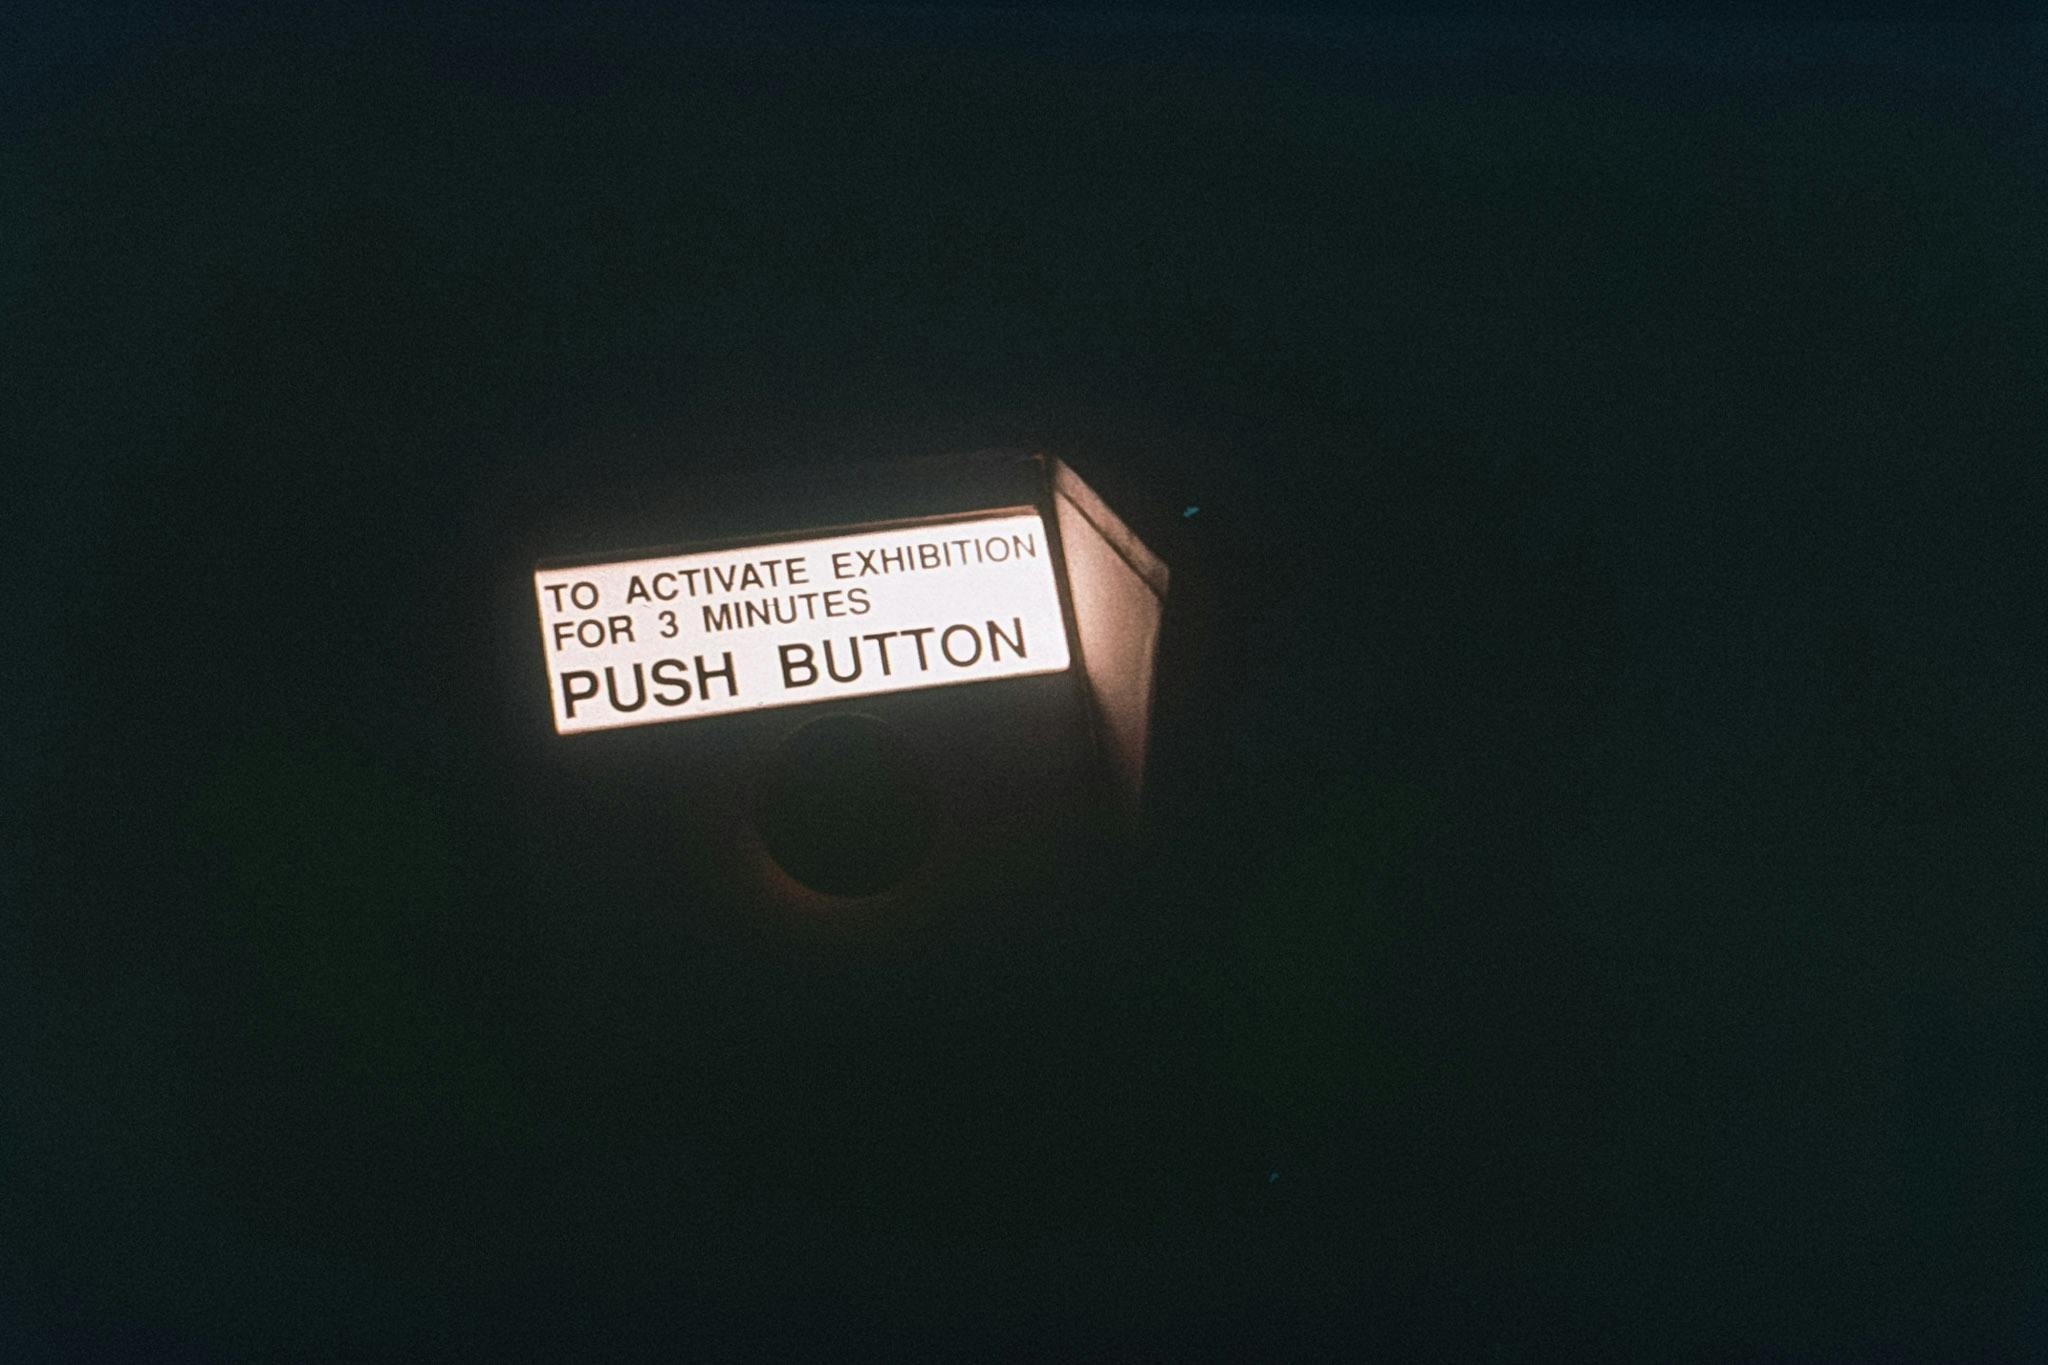 A darkened entrance to a gallery space, with a small bright sign glowing above a round buzzer button. The sign reads "to activate the exhibition for 3 minutes, push button."  